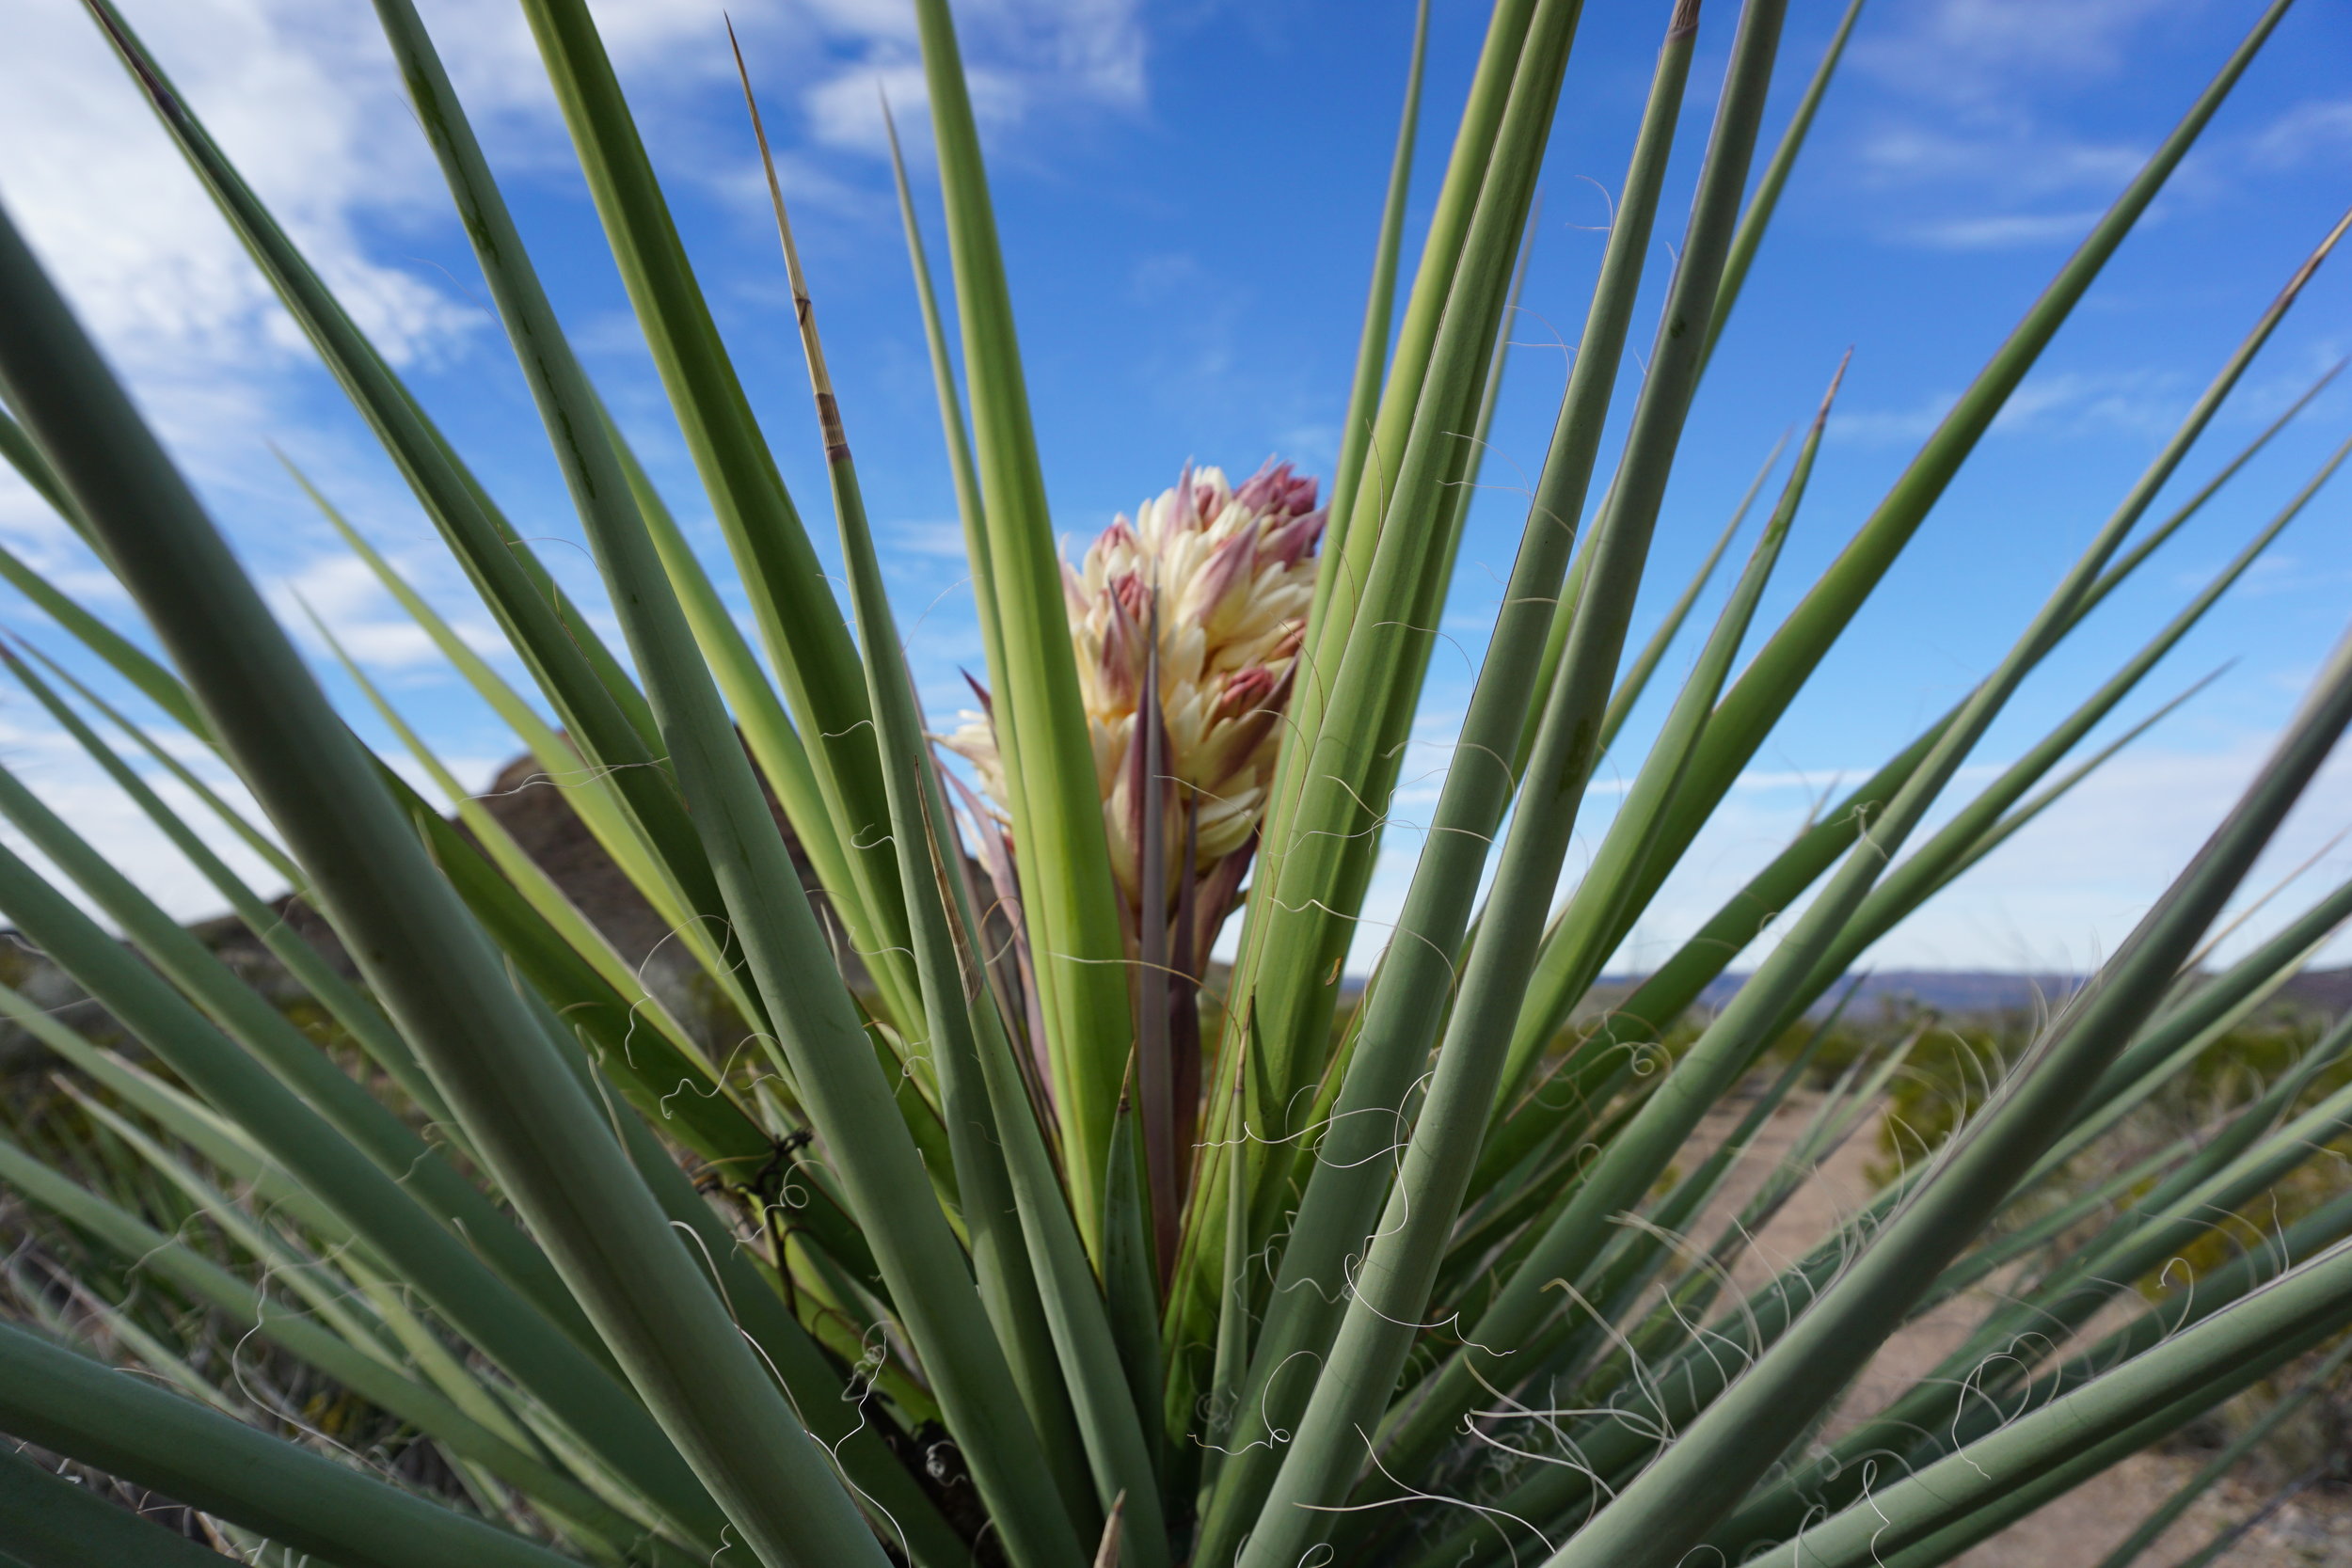 Agave plant in the Texas desert